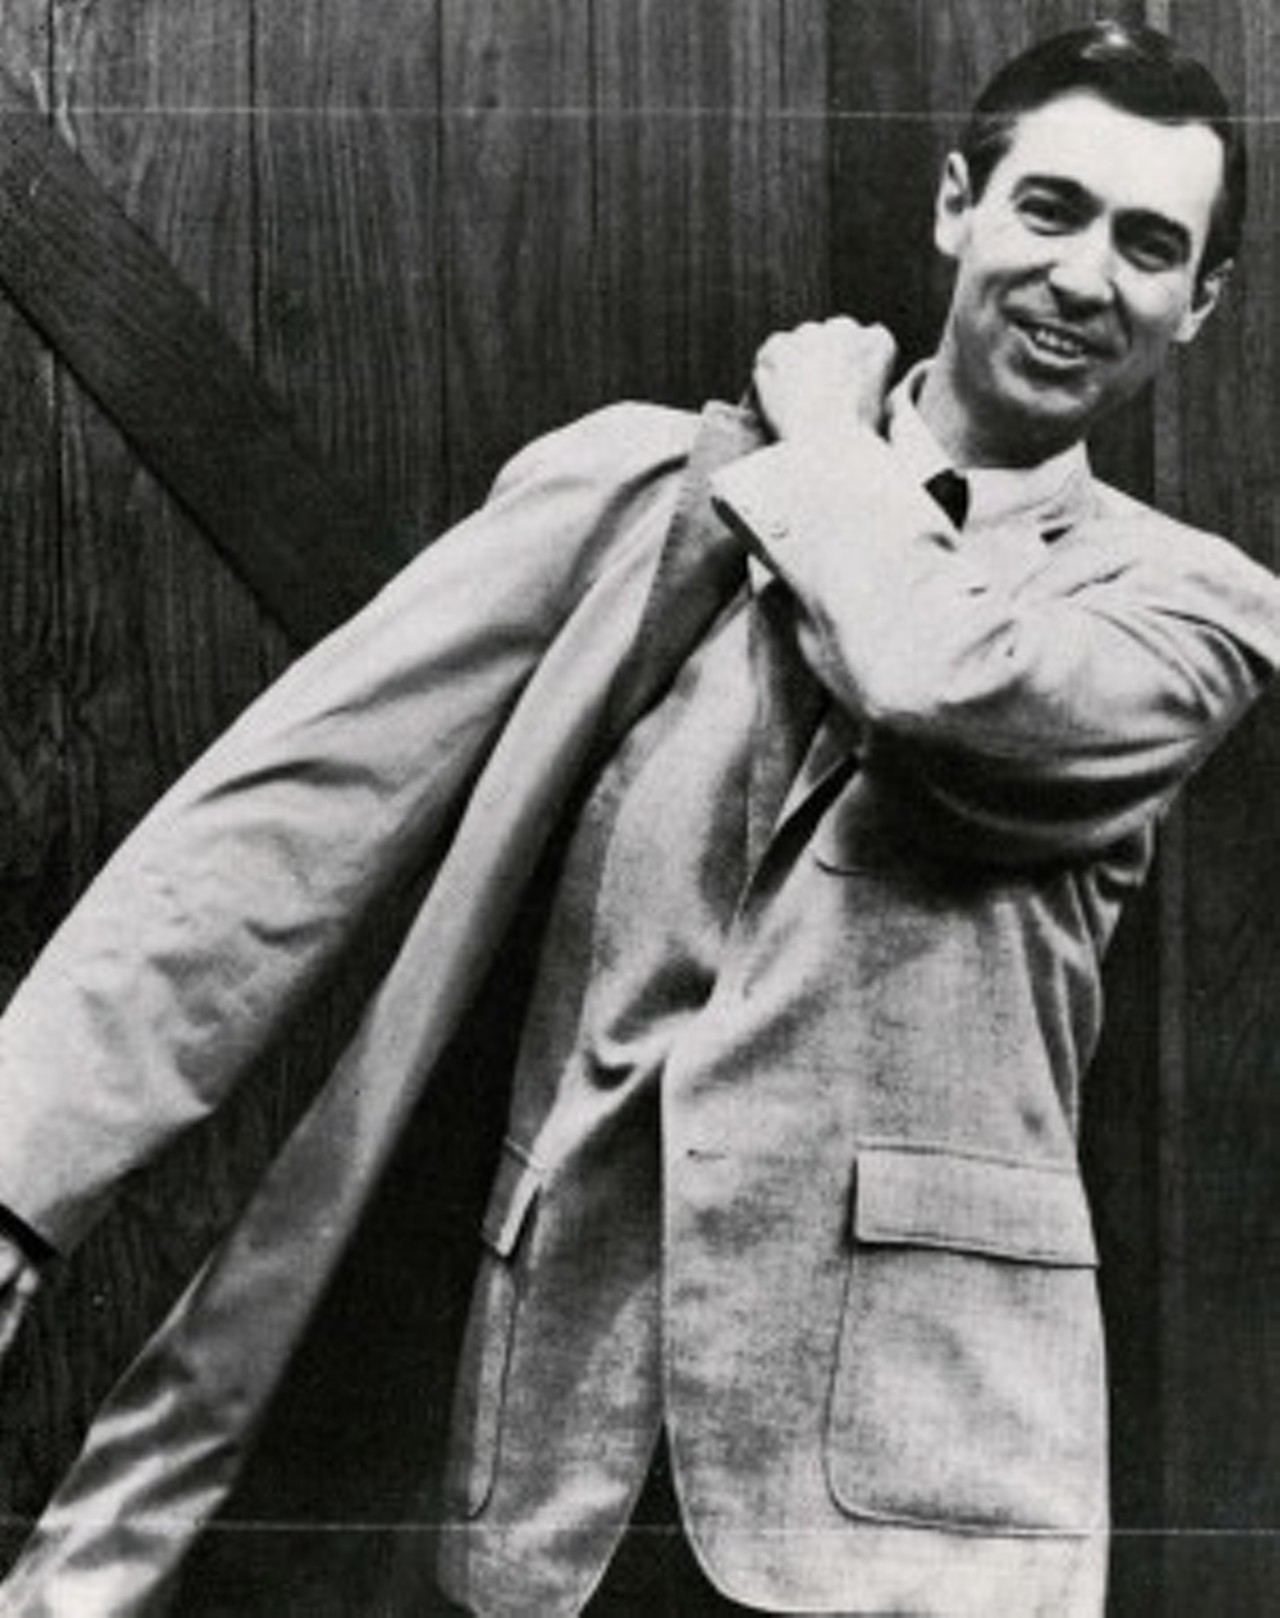 Television personality Fred Rogers of Mister Rogers' Neighborhood used to live in Winter Park, and was a graduate of Rollins College.
Photo via Orlando Weekly